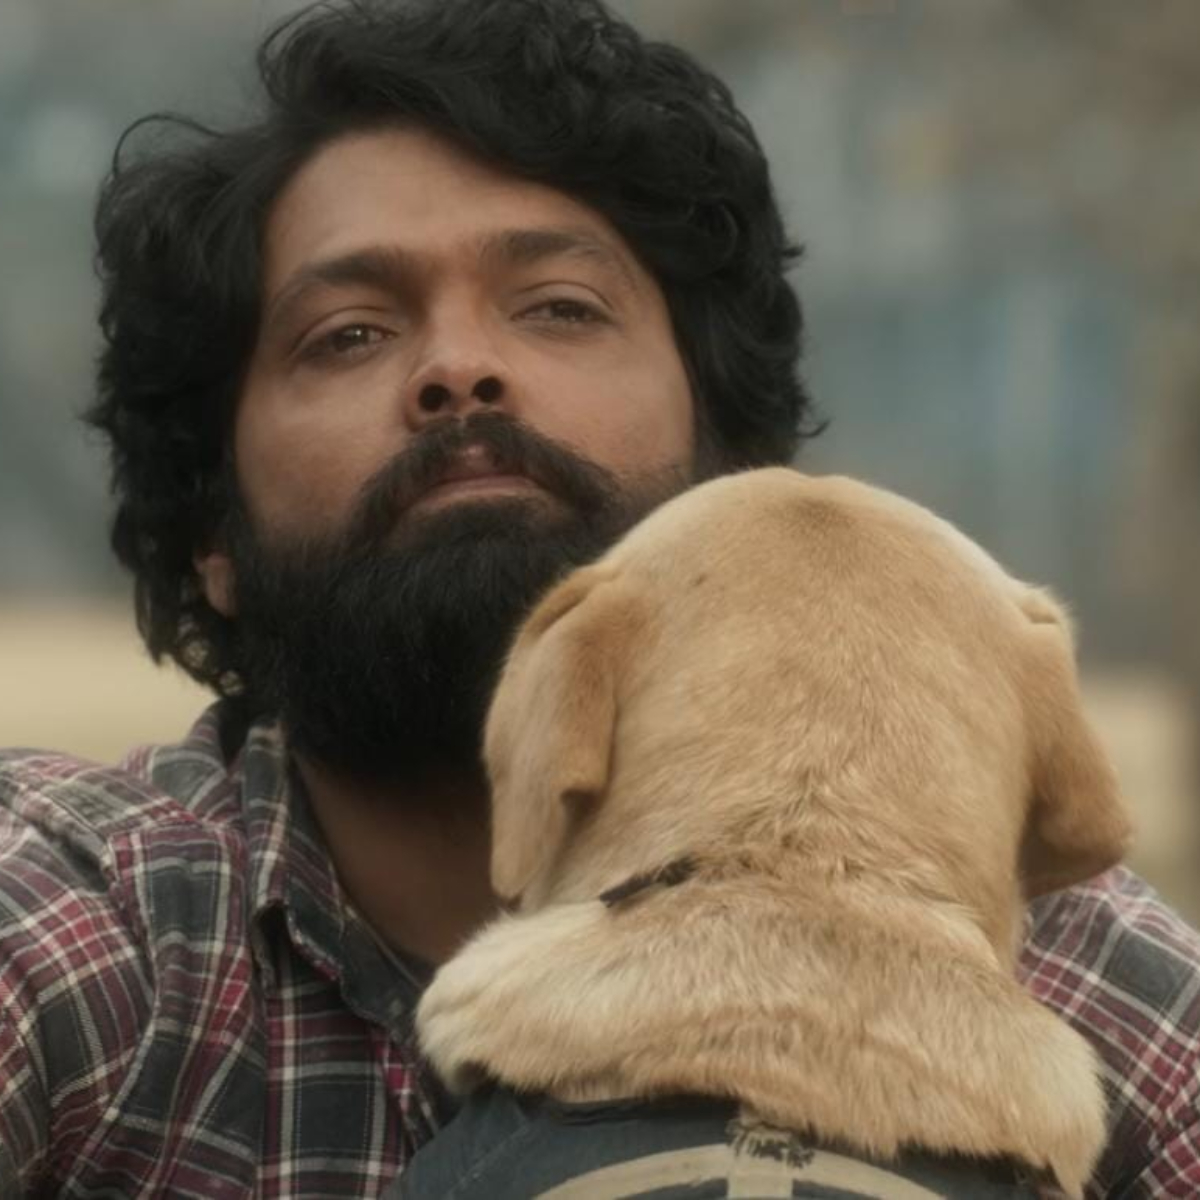 777 Charlie Second Weekend Box Office Collections; Outstanding hold, Leaps over 50 crores in India